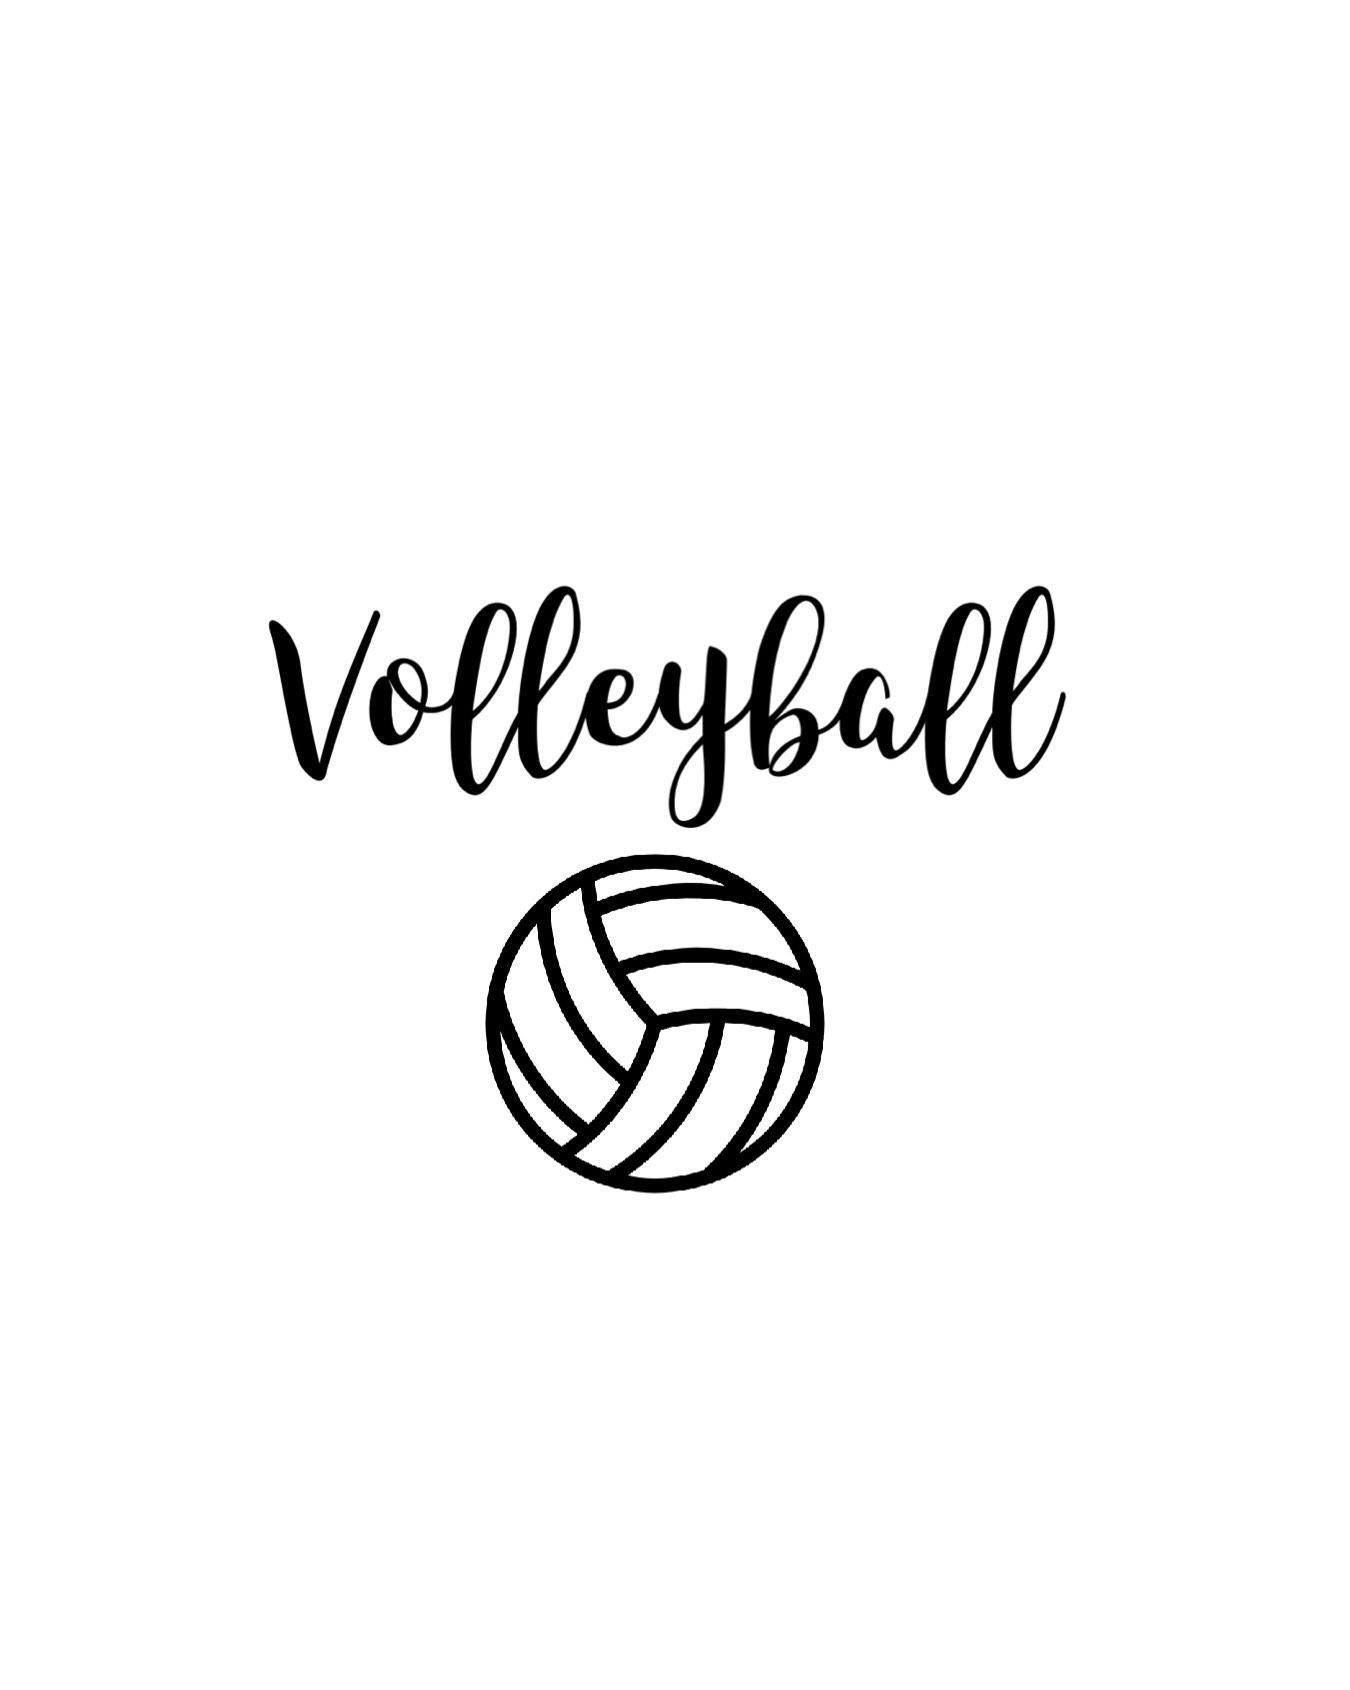 Volleyball Aesthetic Wallpaper Free Volleyball Aesthetic Background